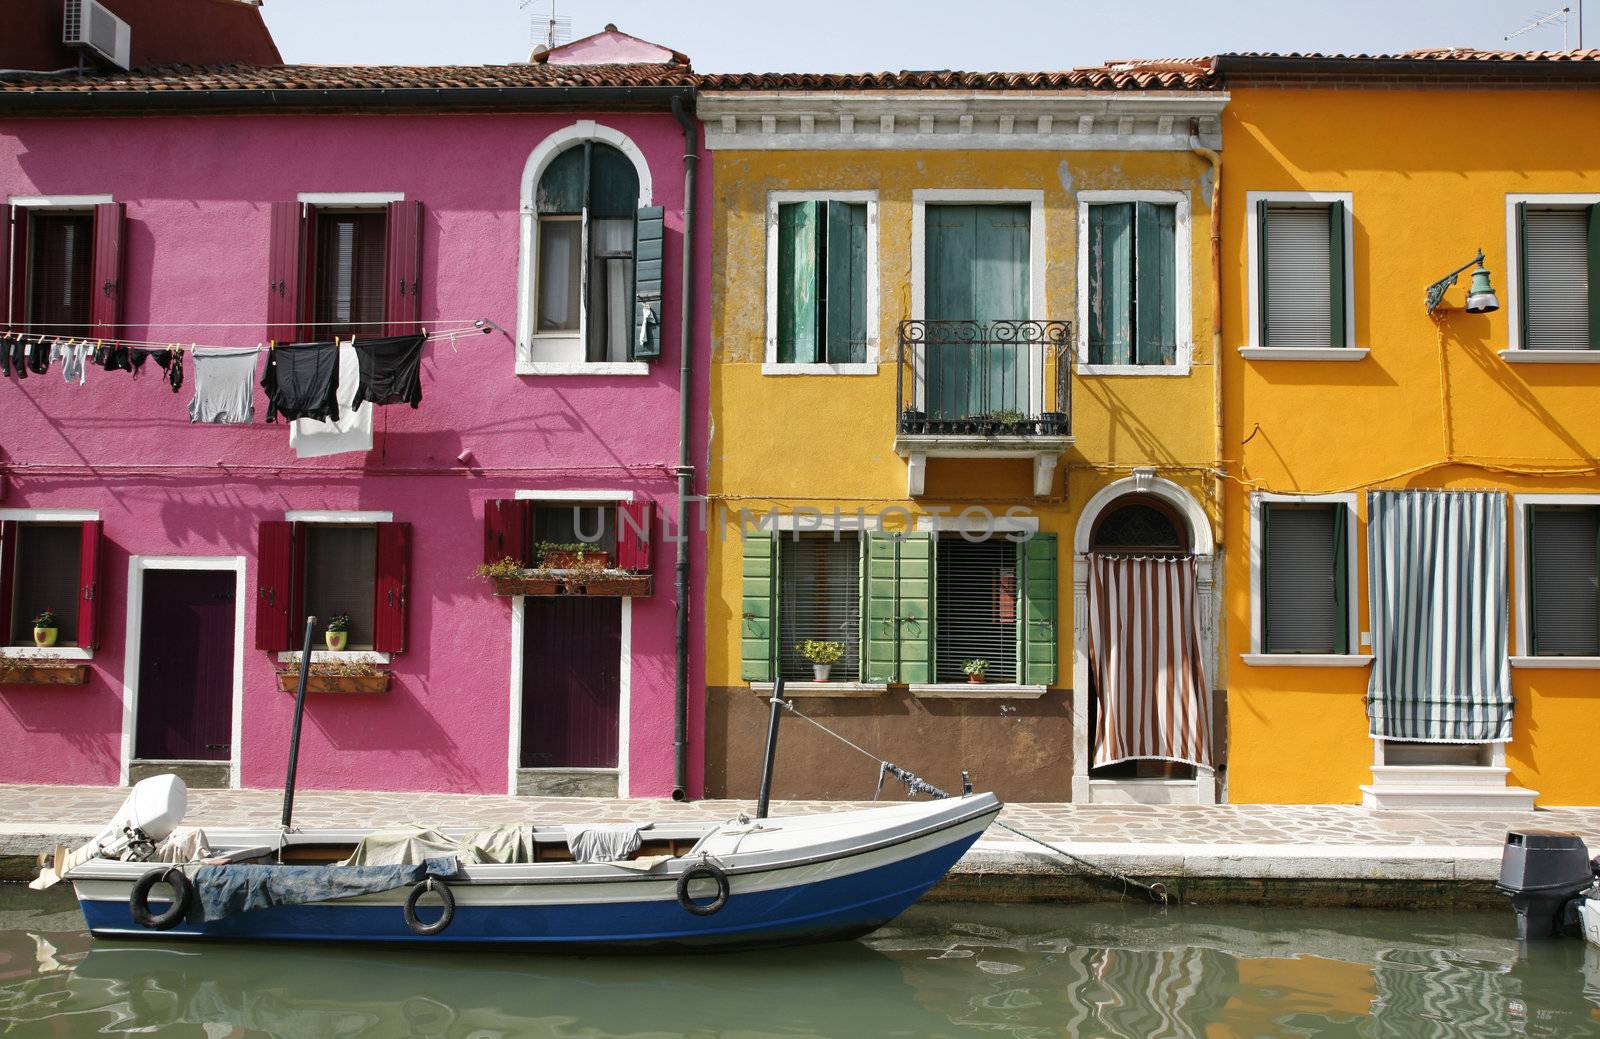 Colorful houses on the island of Burano in the Venetian lagoon - Italy.